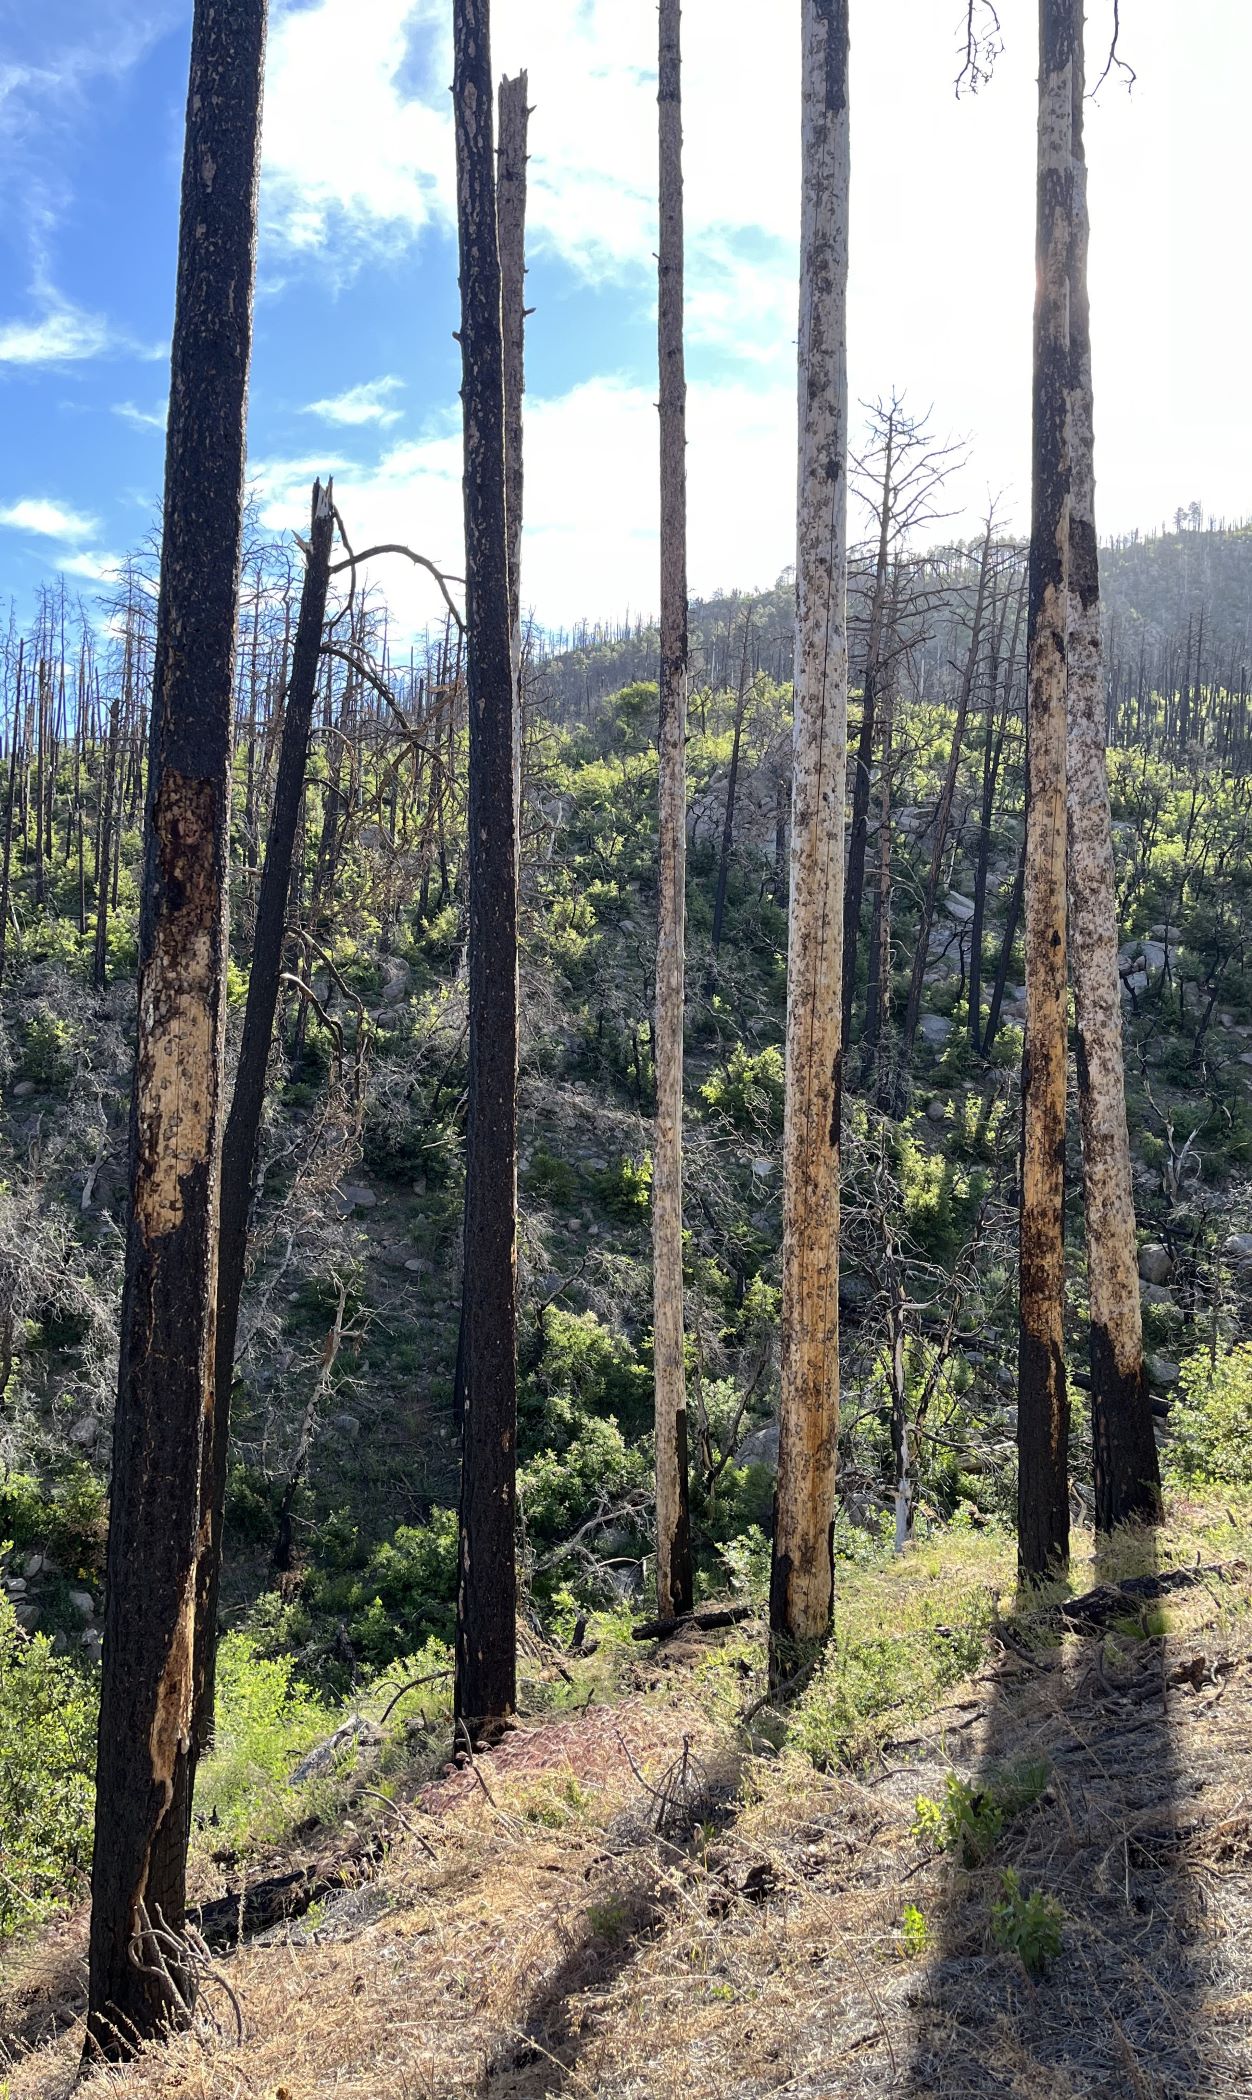 Burned ponderosa pines with new vegetation growing on the ground